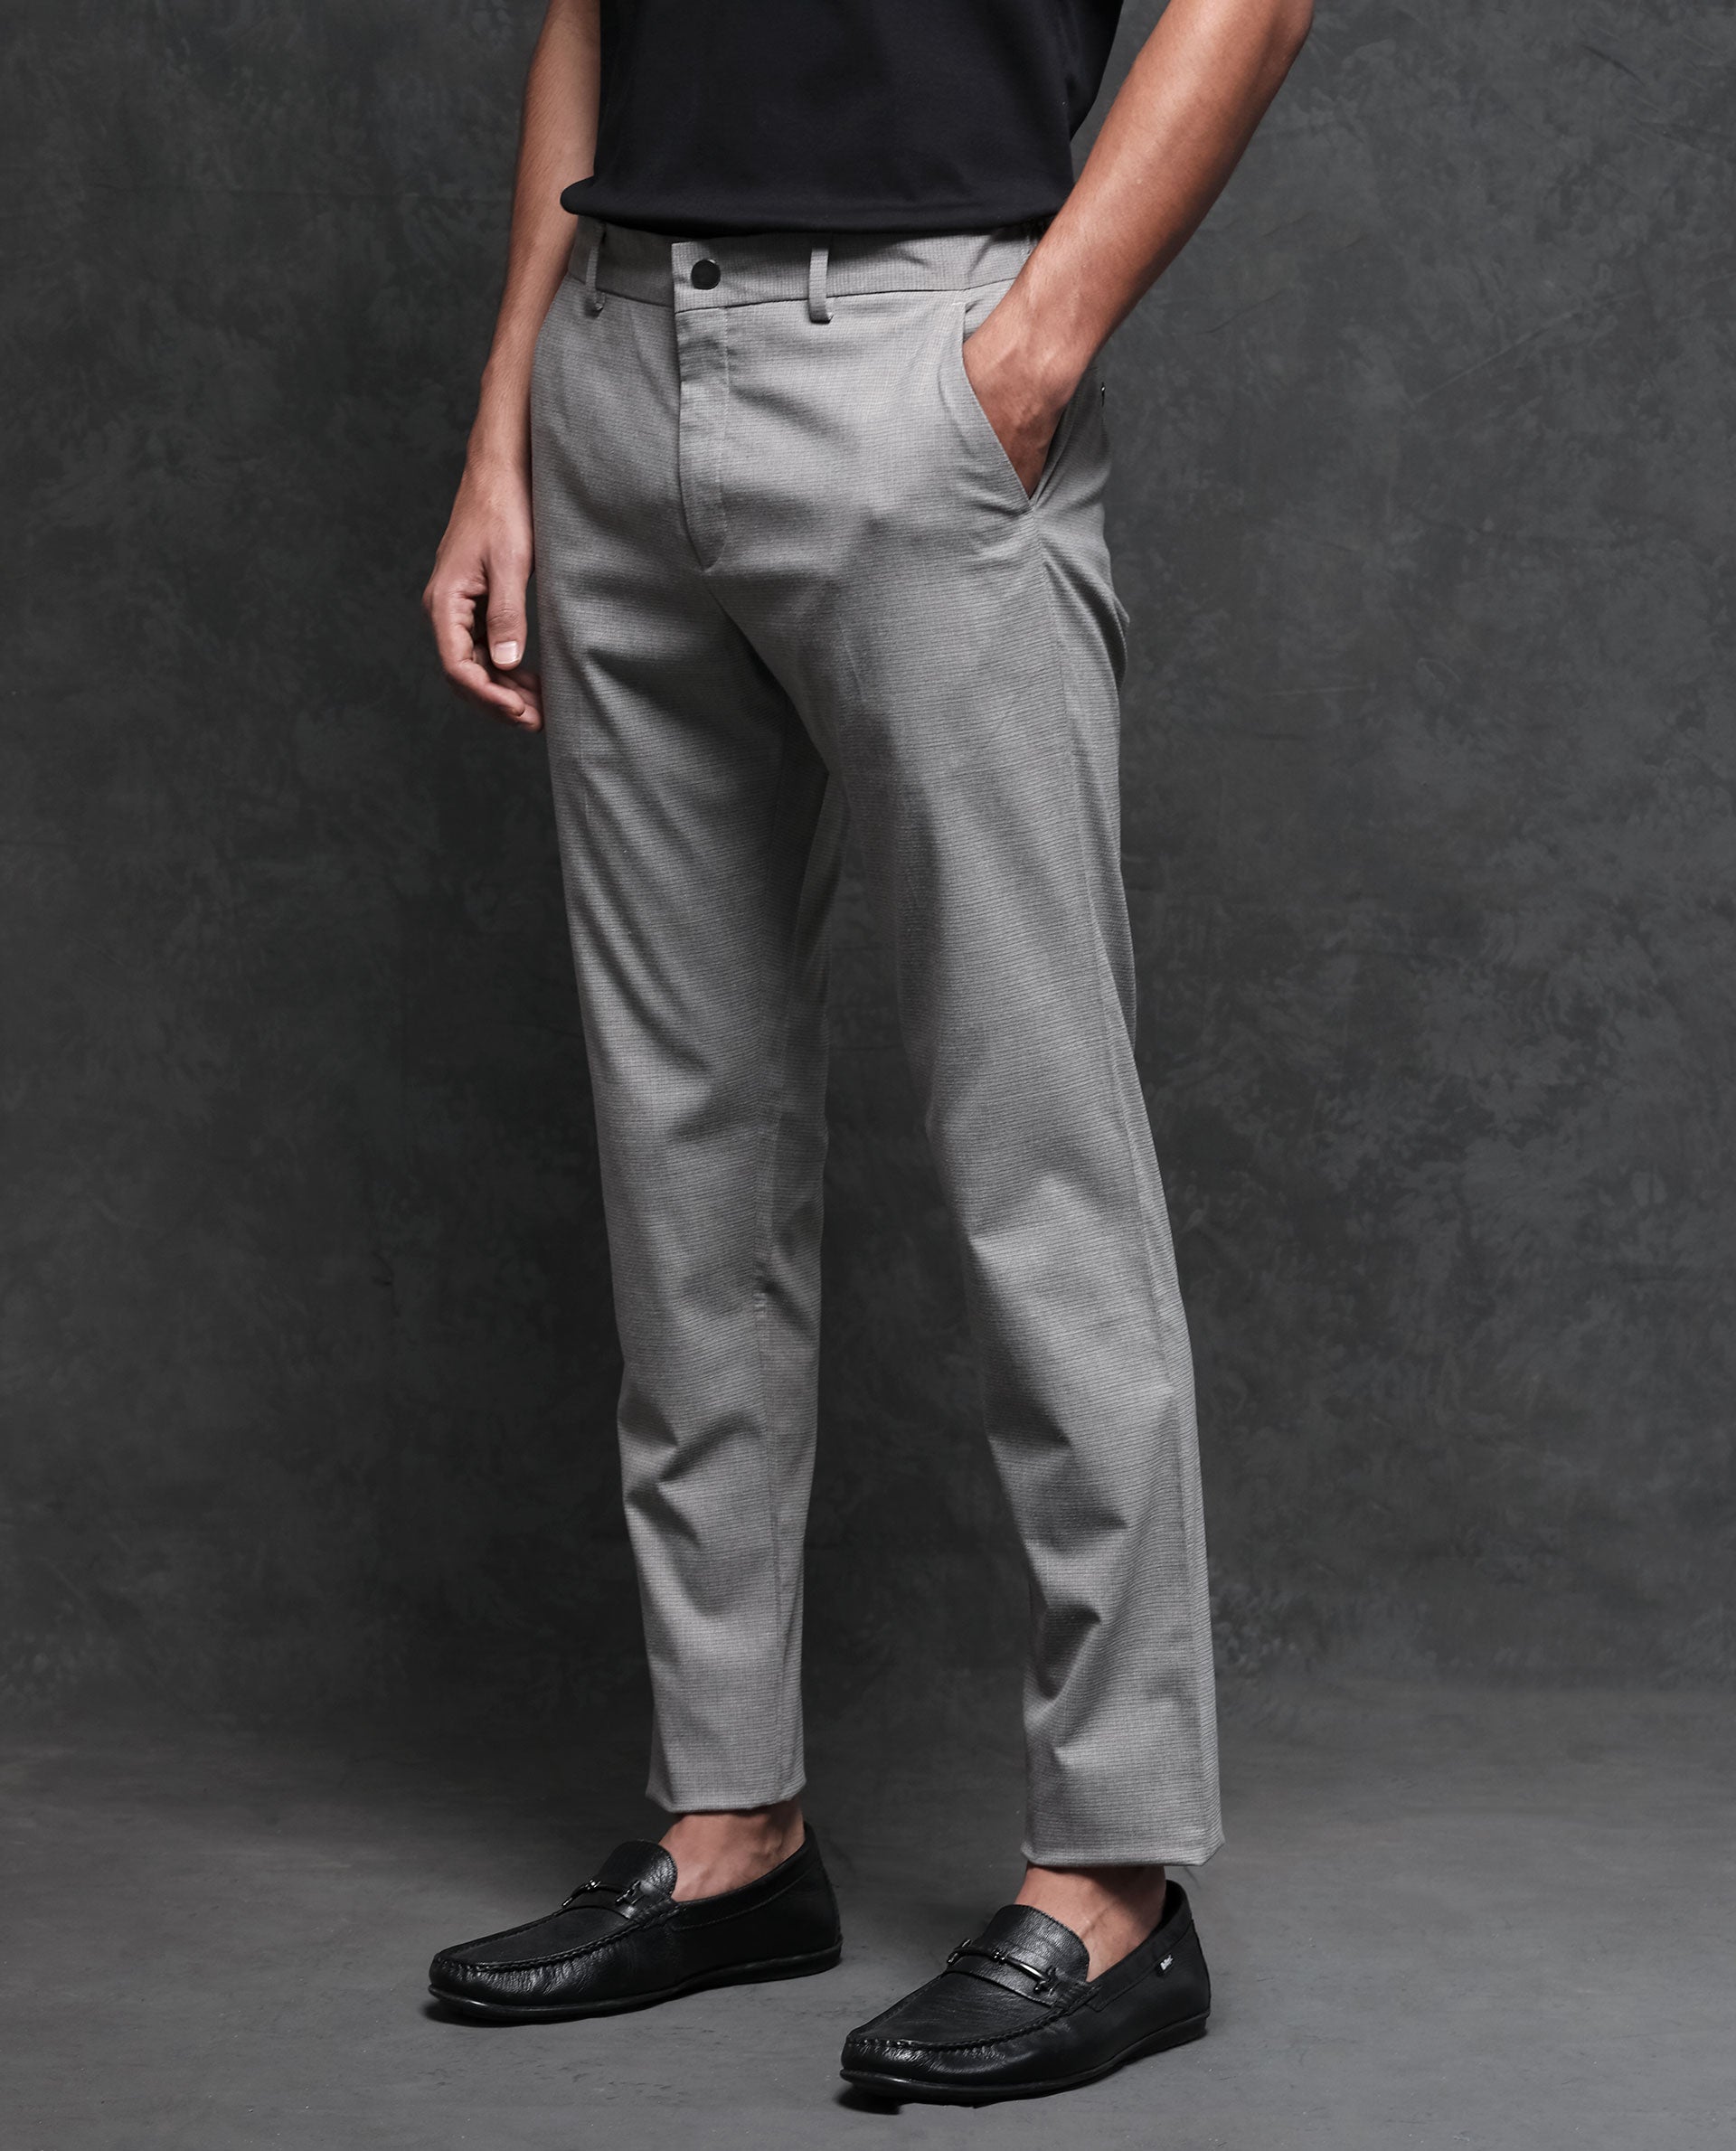 Grey Trousers For Men 6 Outfits That Will Last You All Week  FashionBeans